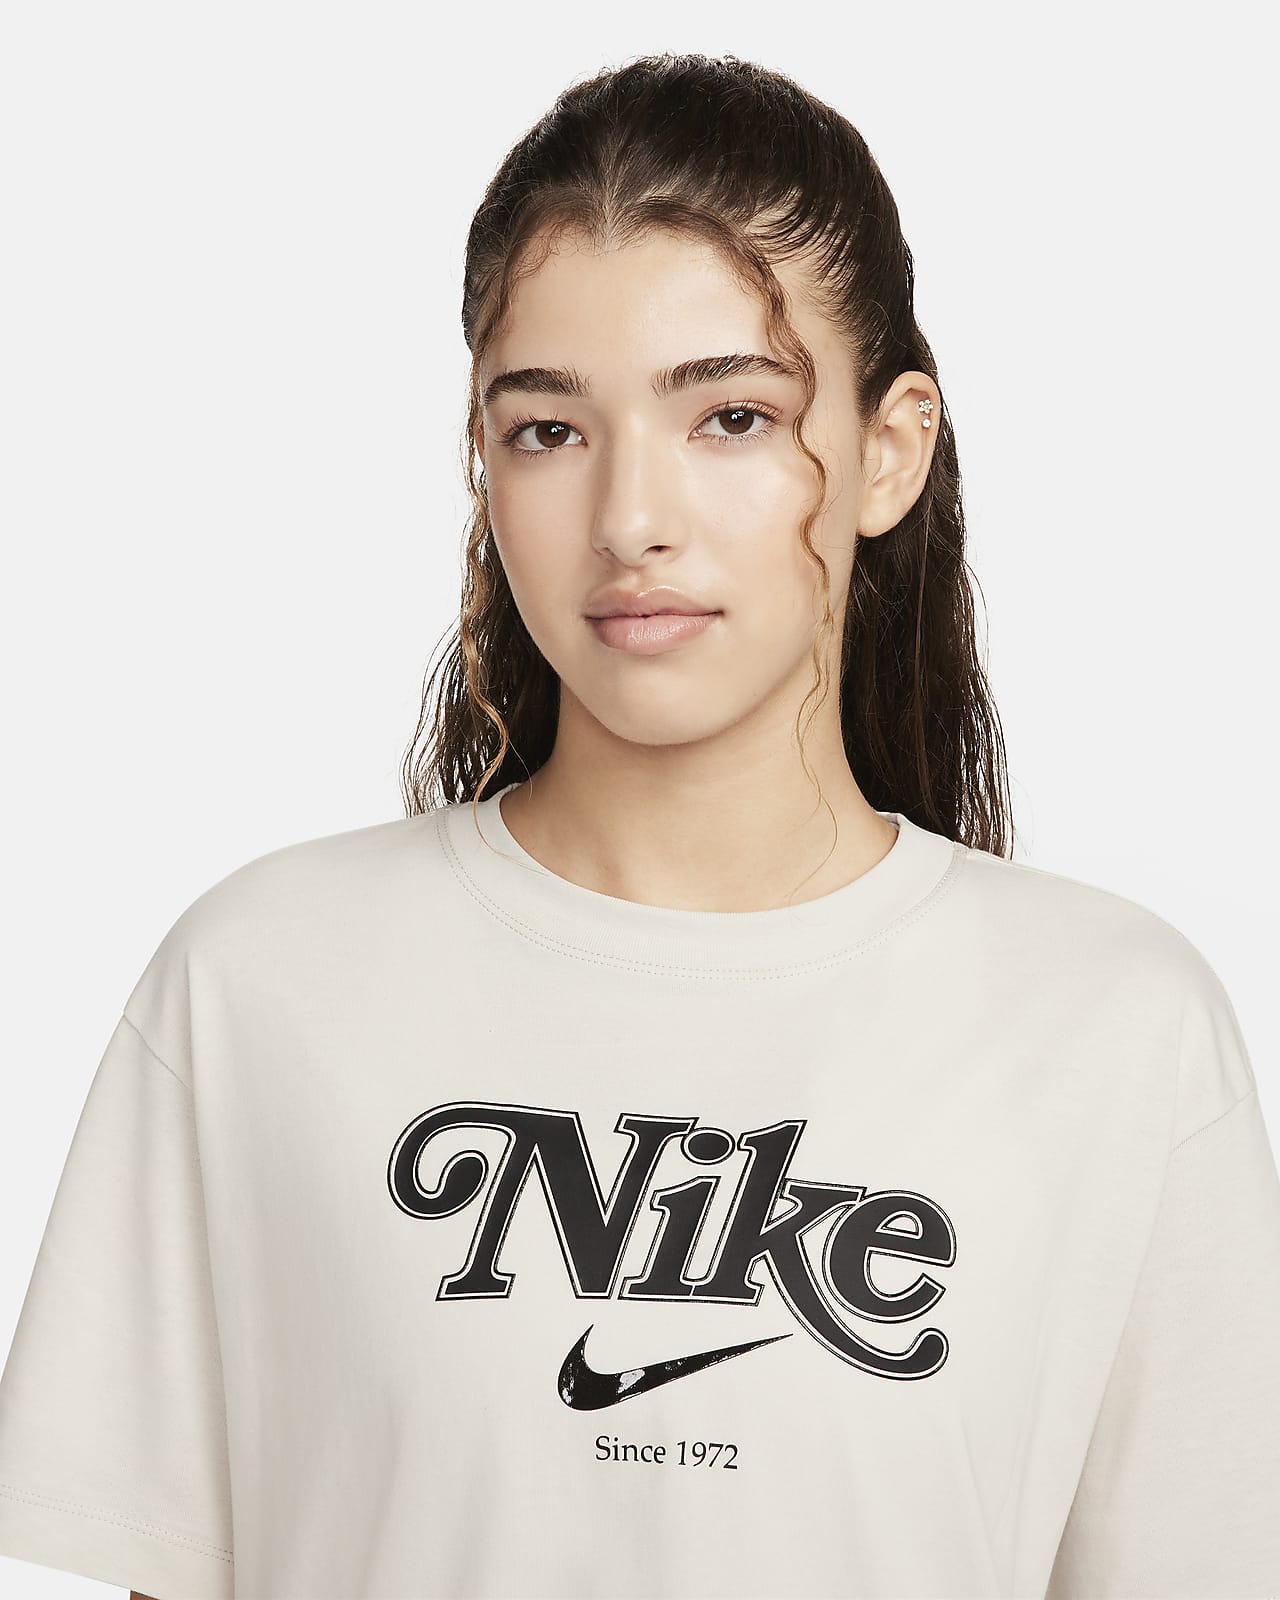 Women's Nike T-Shirts: Top Off Your Active Look with Nike Tees